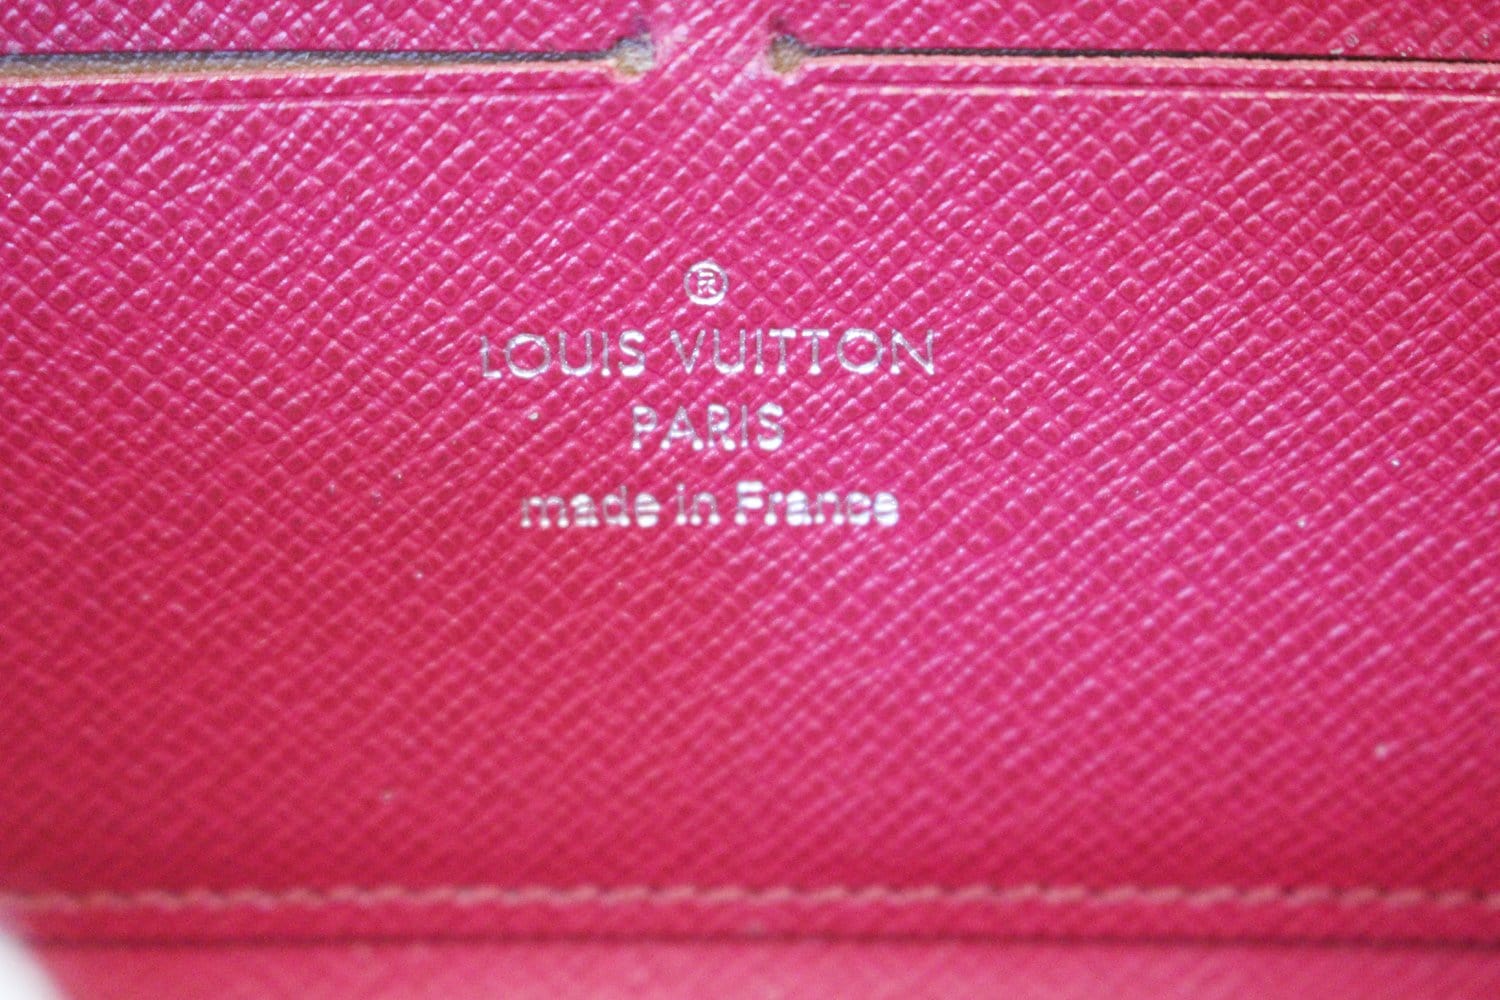 Louis Vuitton Pink Epi Leather Zippy Wallet (Authentic Pre-Owned